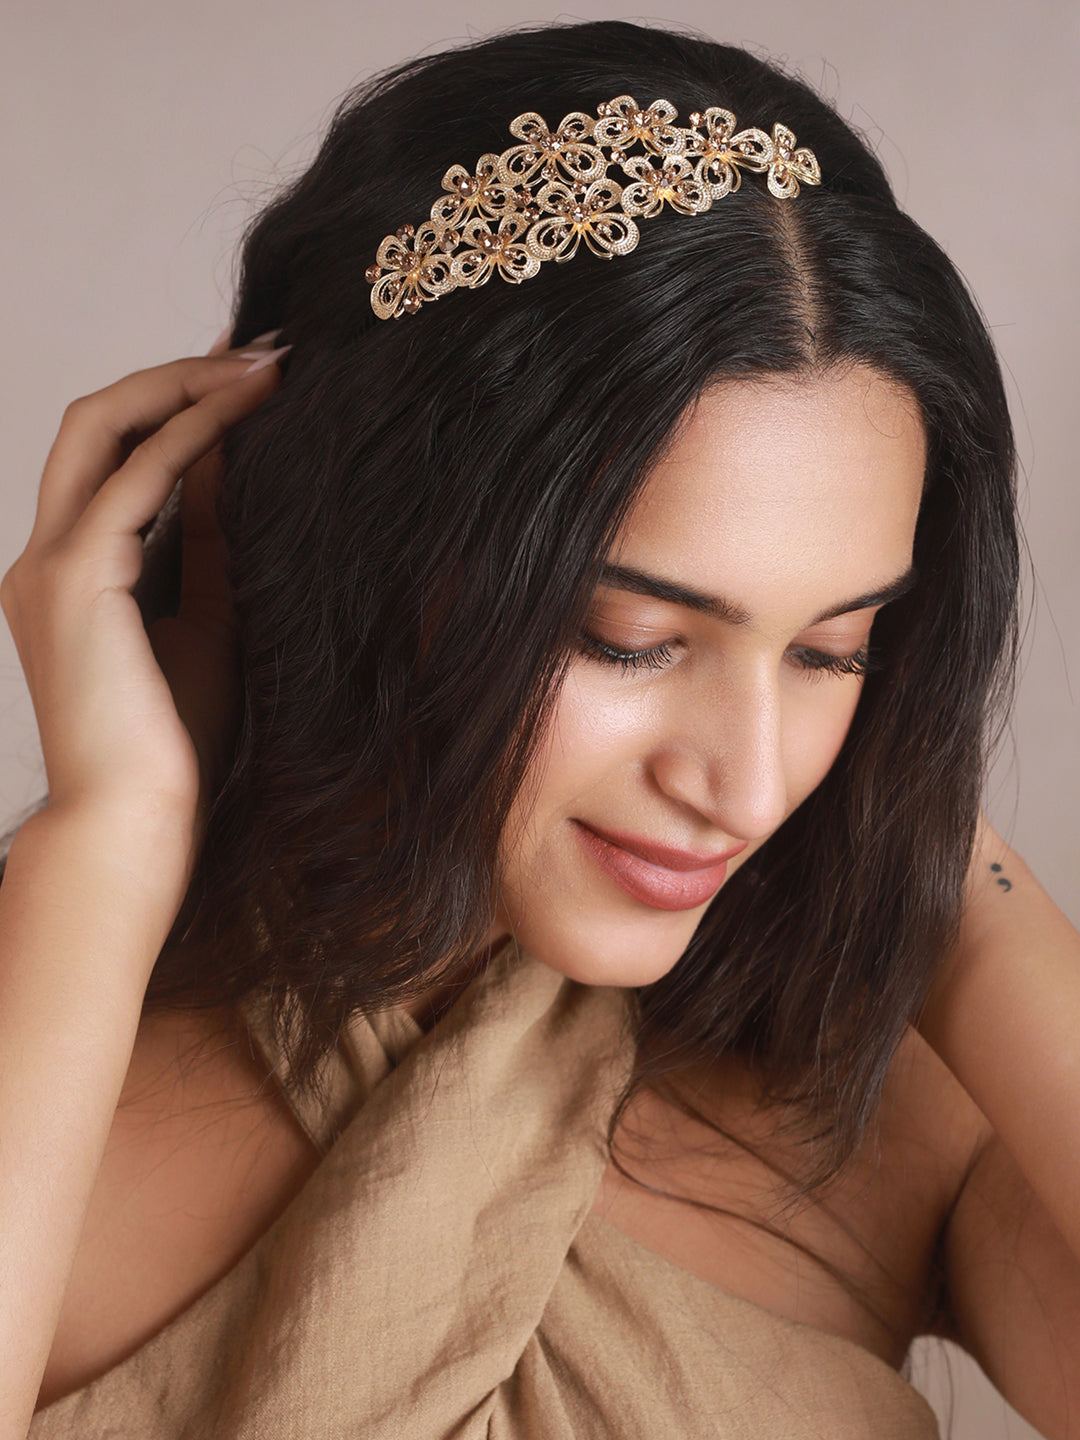 Priyaasi Brown Stone Studded Gold-Plated Butterfly Hair Band